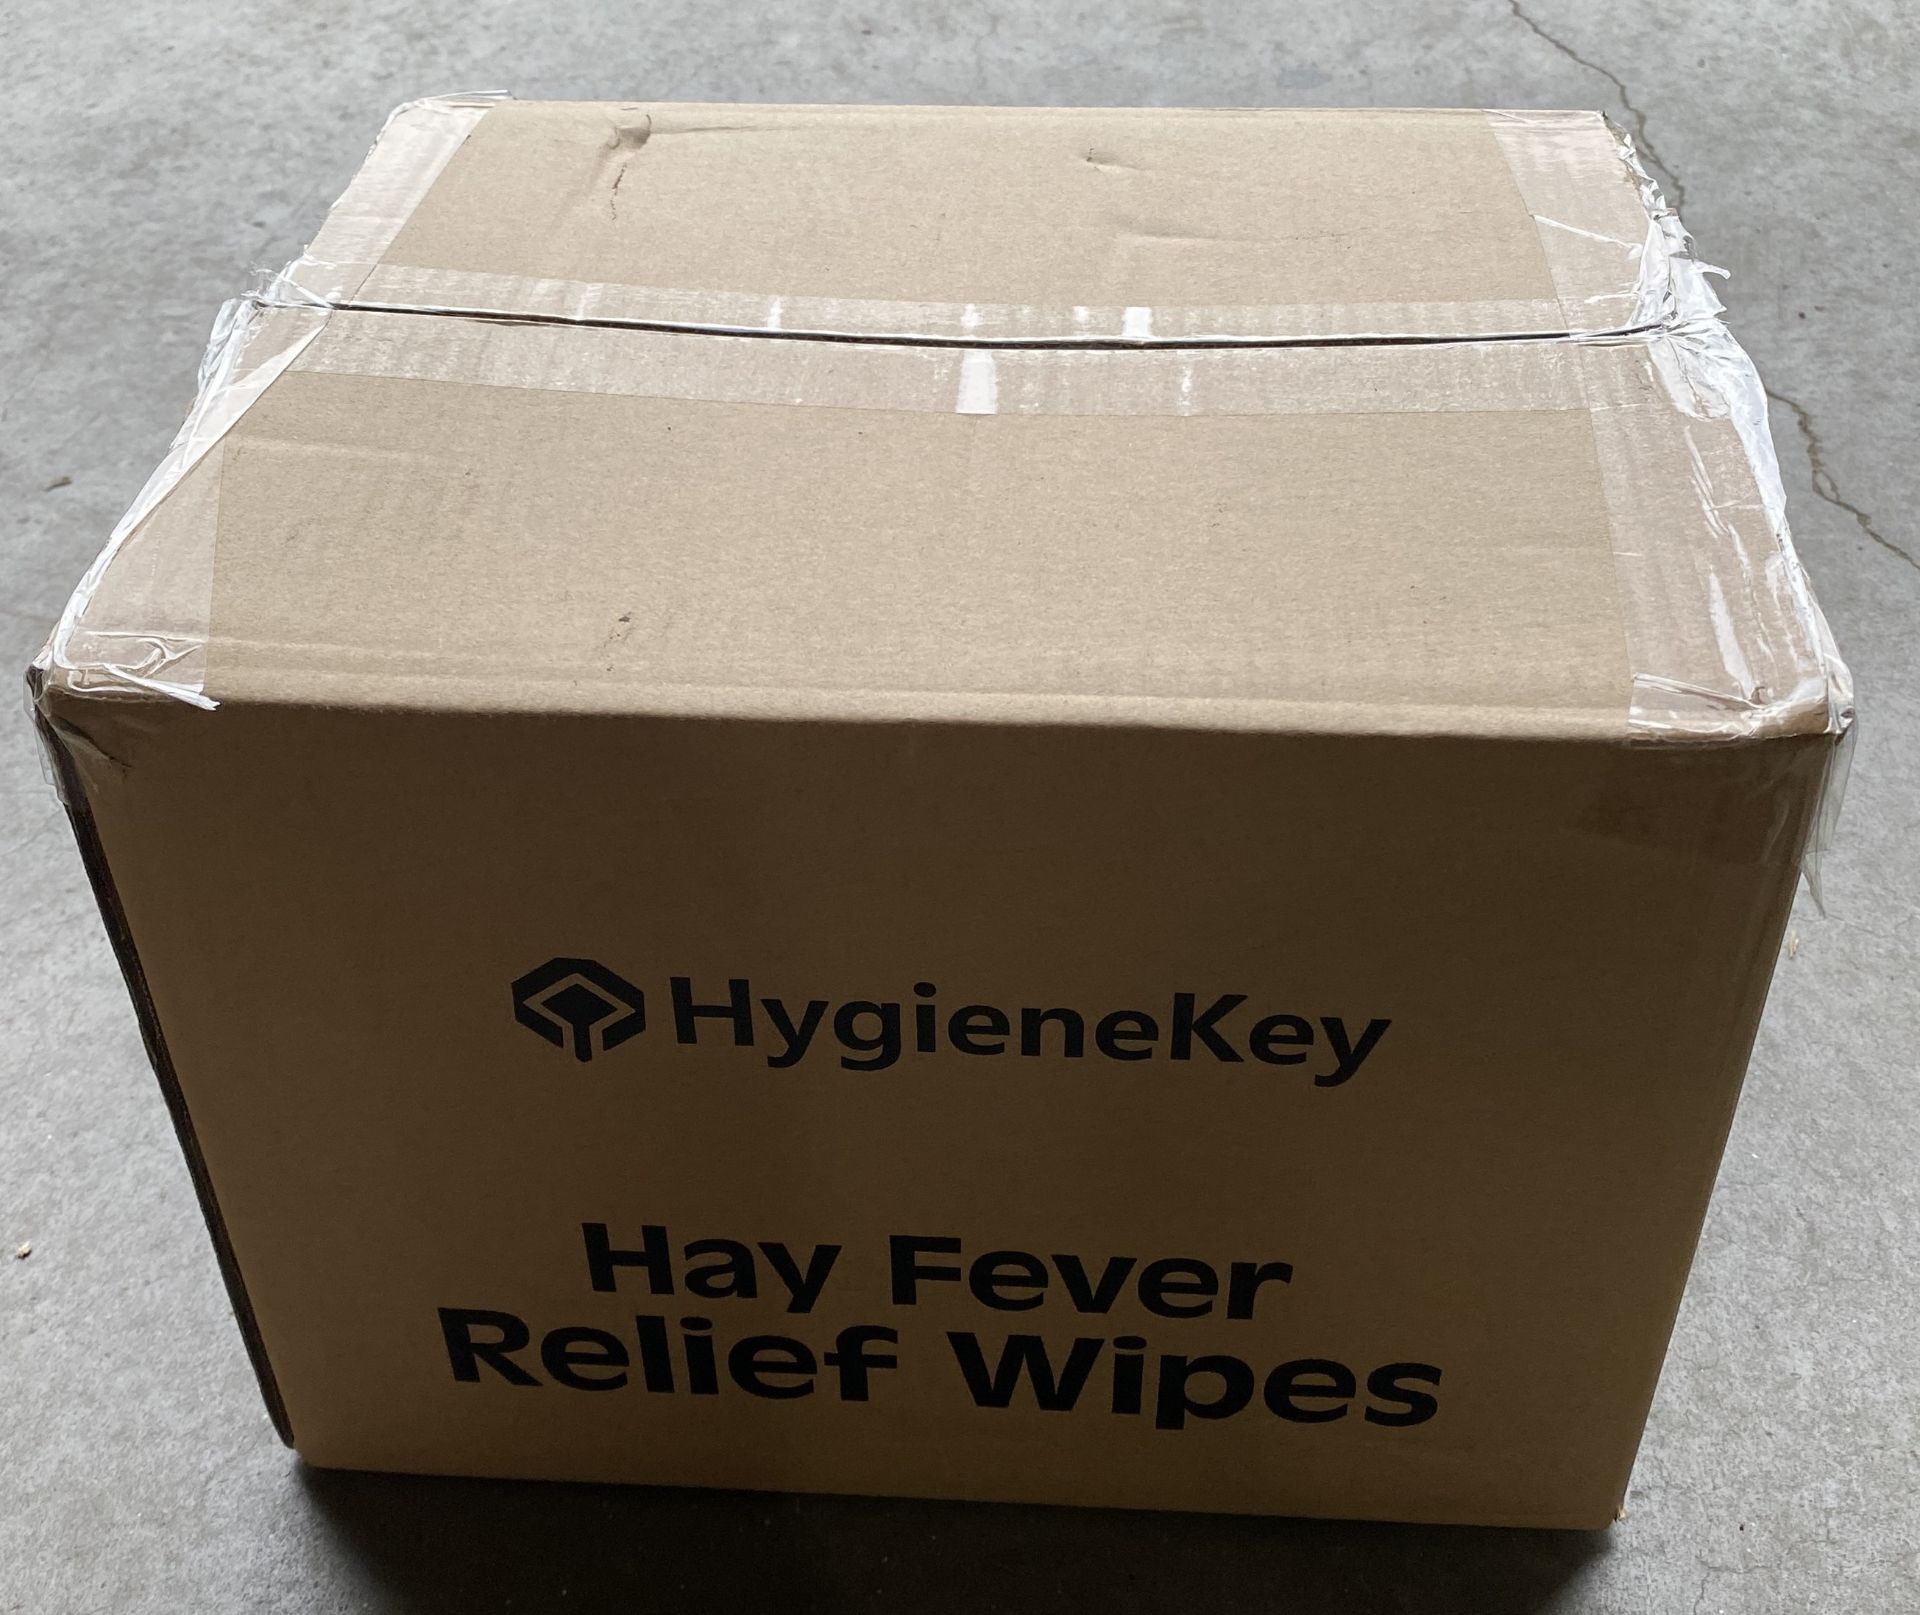 3600 x packs of Hygiene Key Hay Fever Relief Wipes (30 x wipes per pack - expiry date: 30/05/24) - - Image 3 of 8